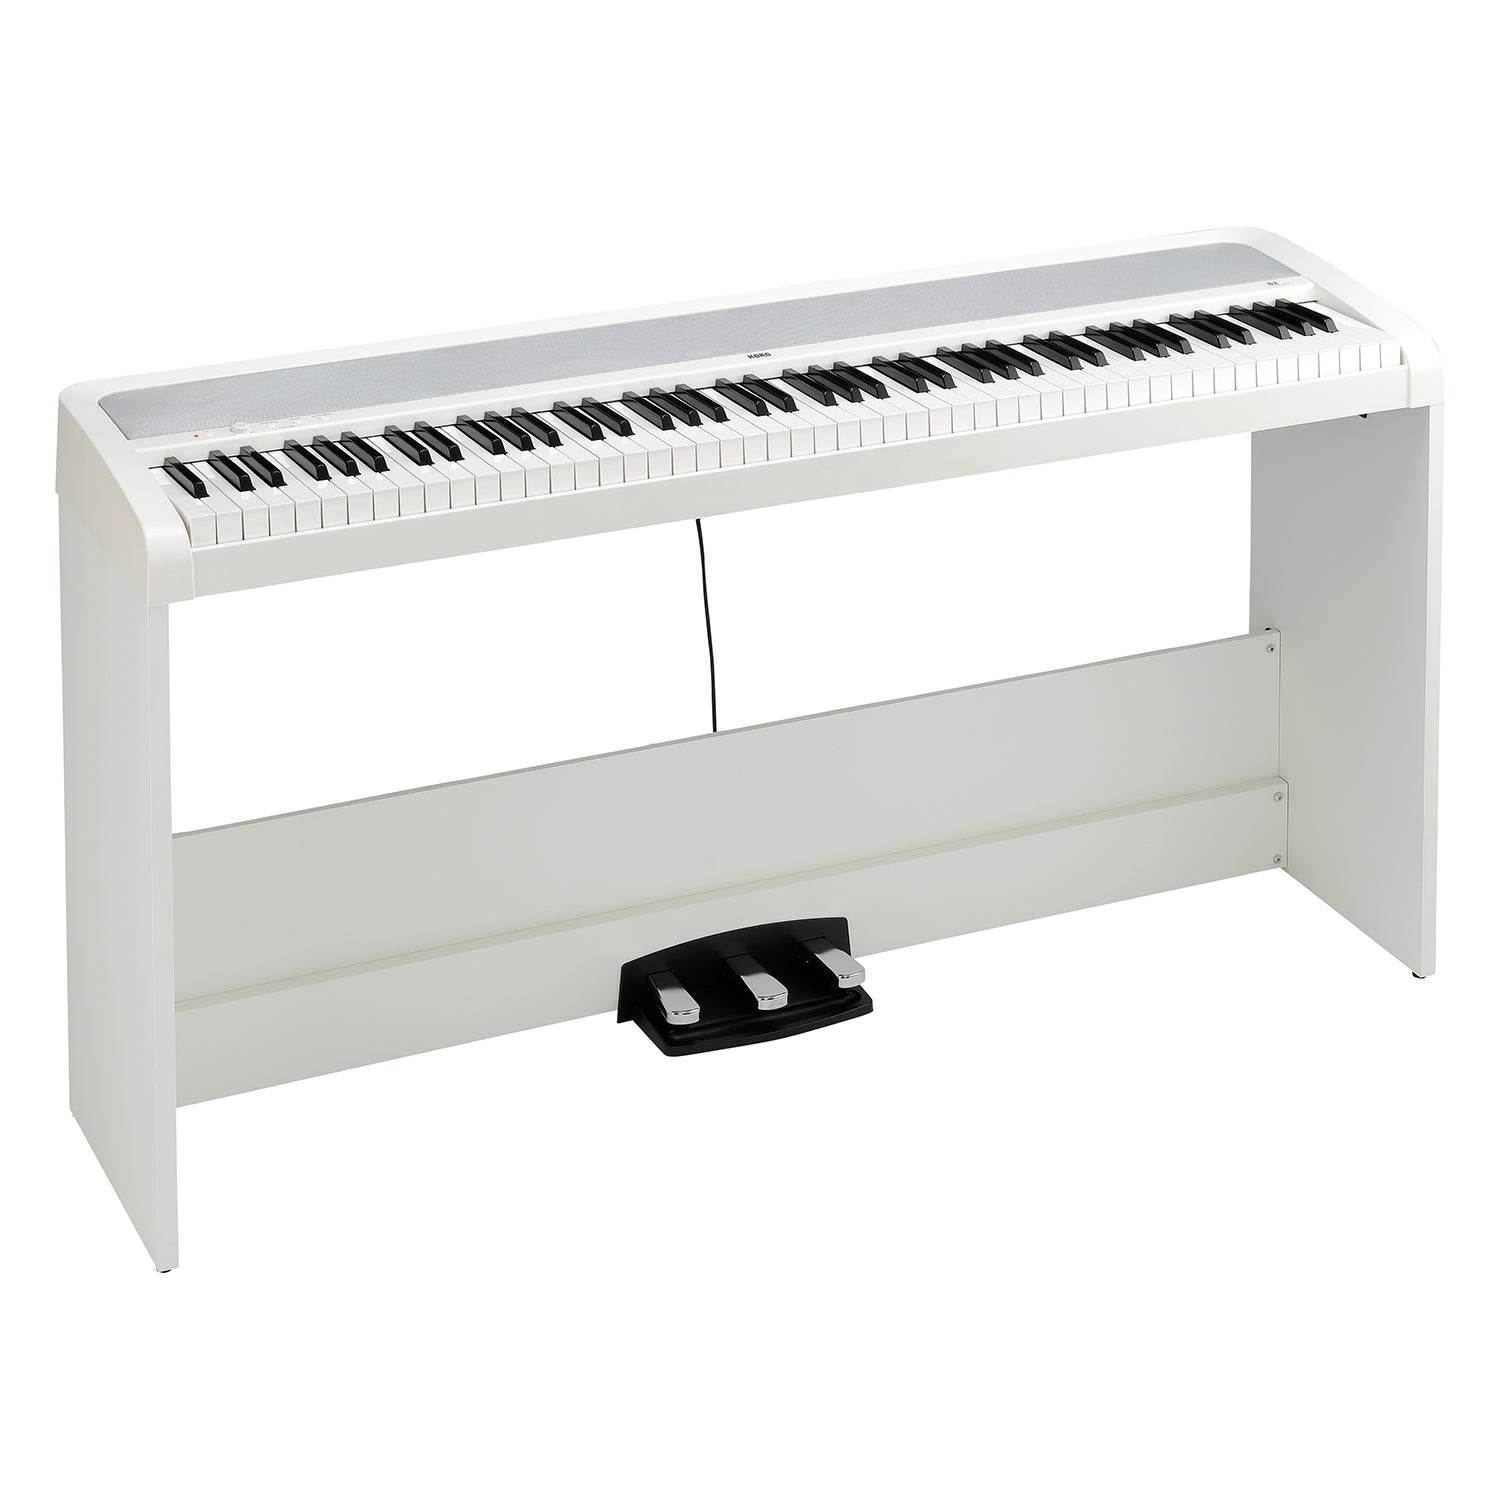 B2 Digital Piano with Stand - White KORG USA Official Store